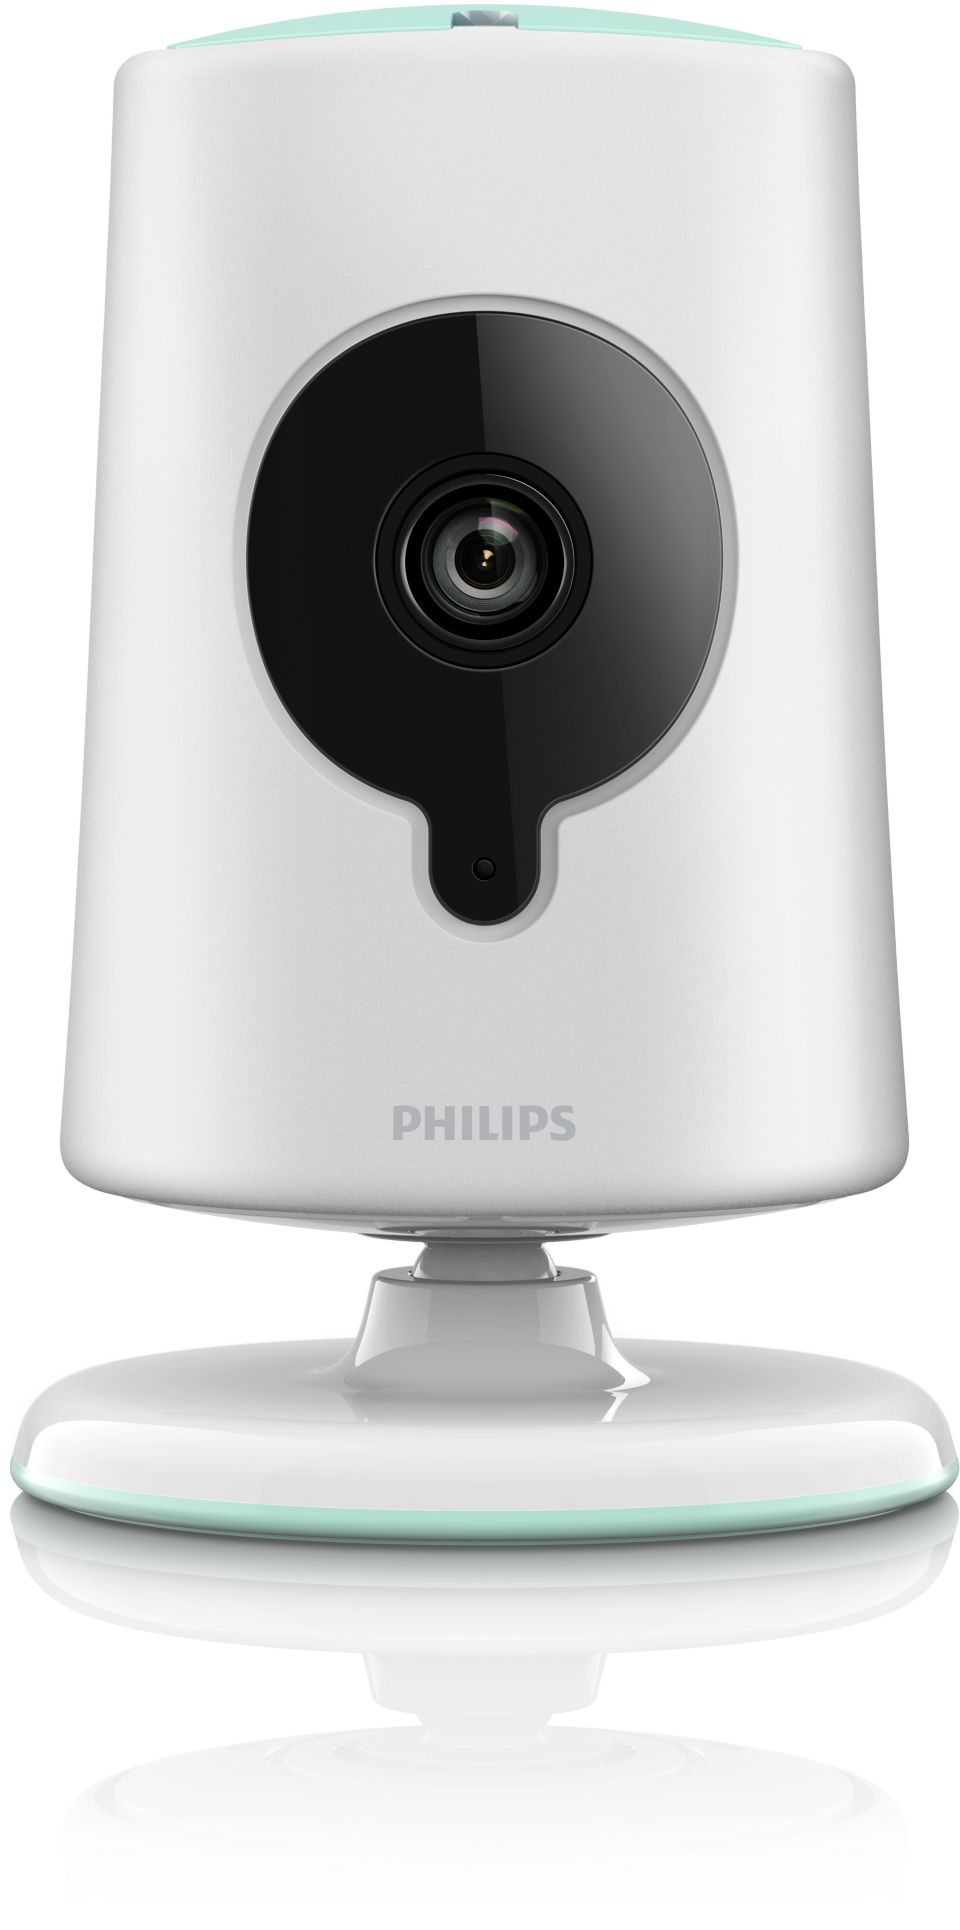 https://images.philips.com/is/image/philipsconsumer/36852a17c7704338a8d5b0c100488f5e?$jpglarge$&wid=960